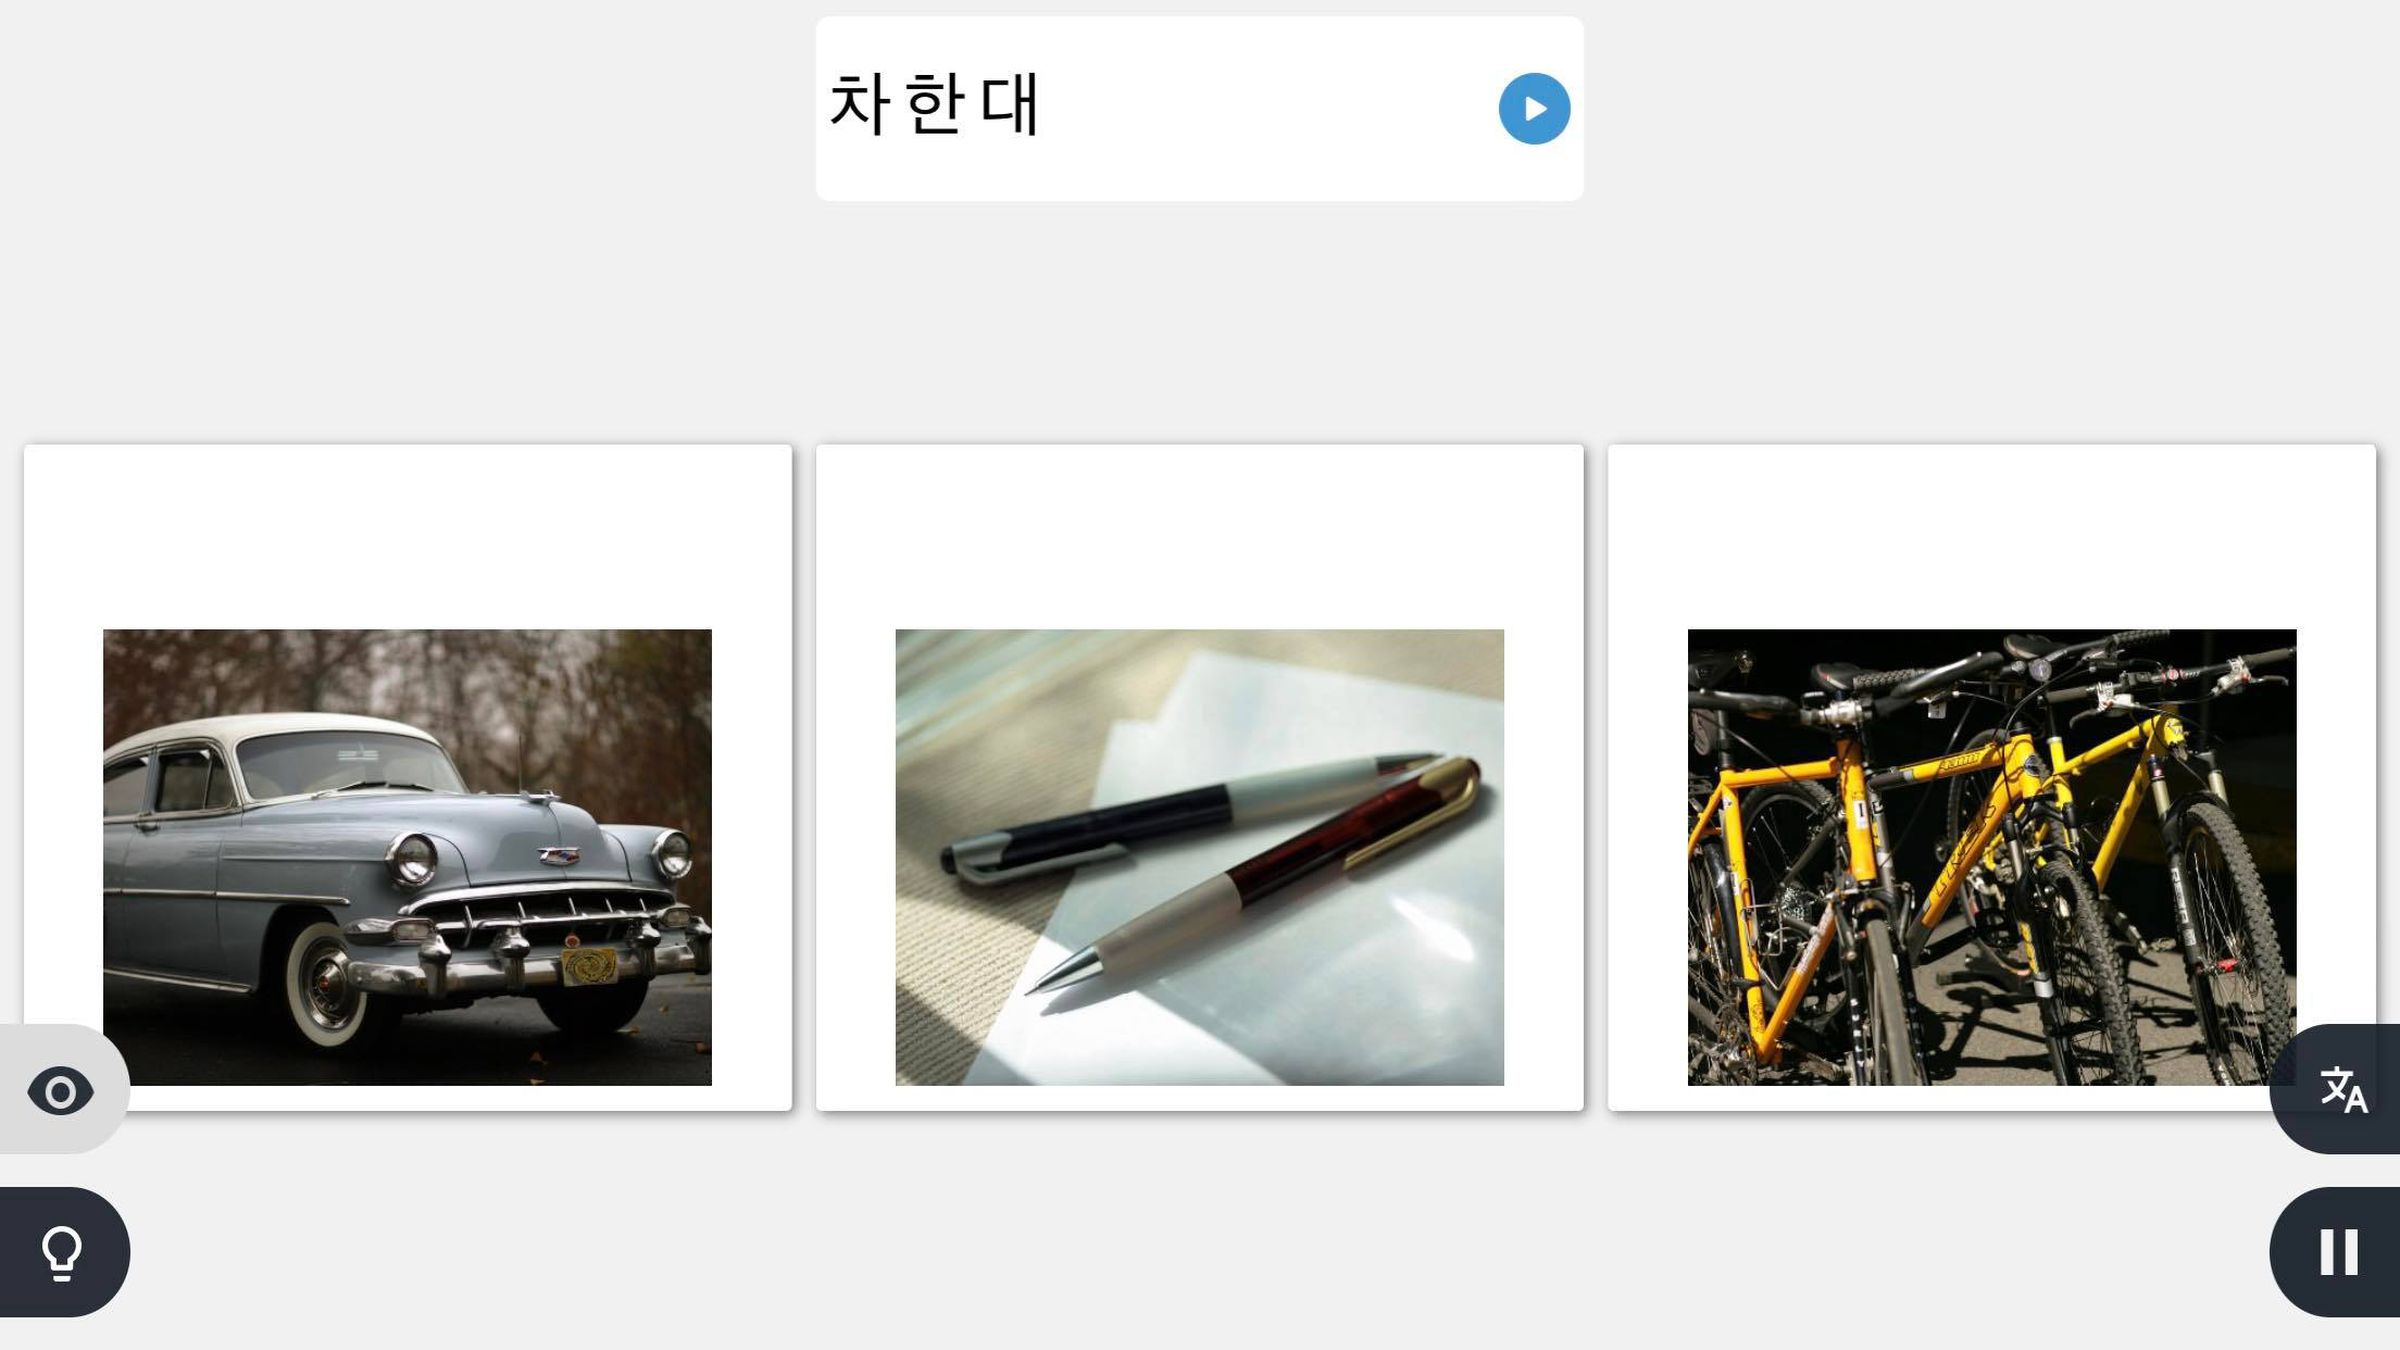 A screenshot of the Rosetta Stone mobile app displaying a Hangul word with photographs of a car, two pens, and three bicycles below.